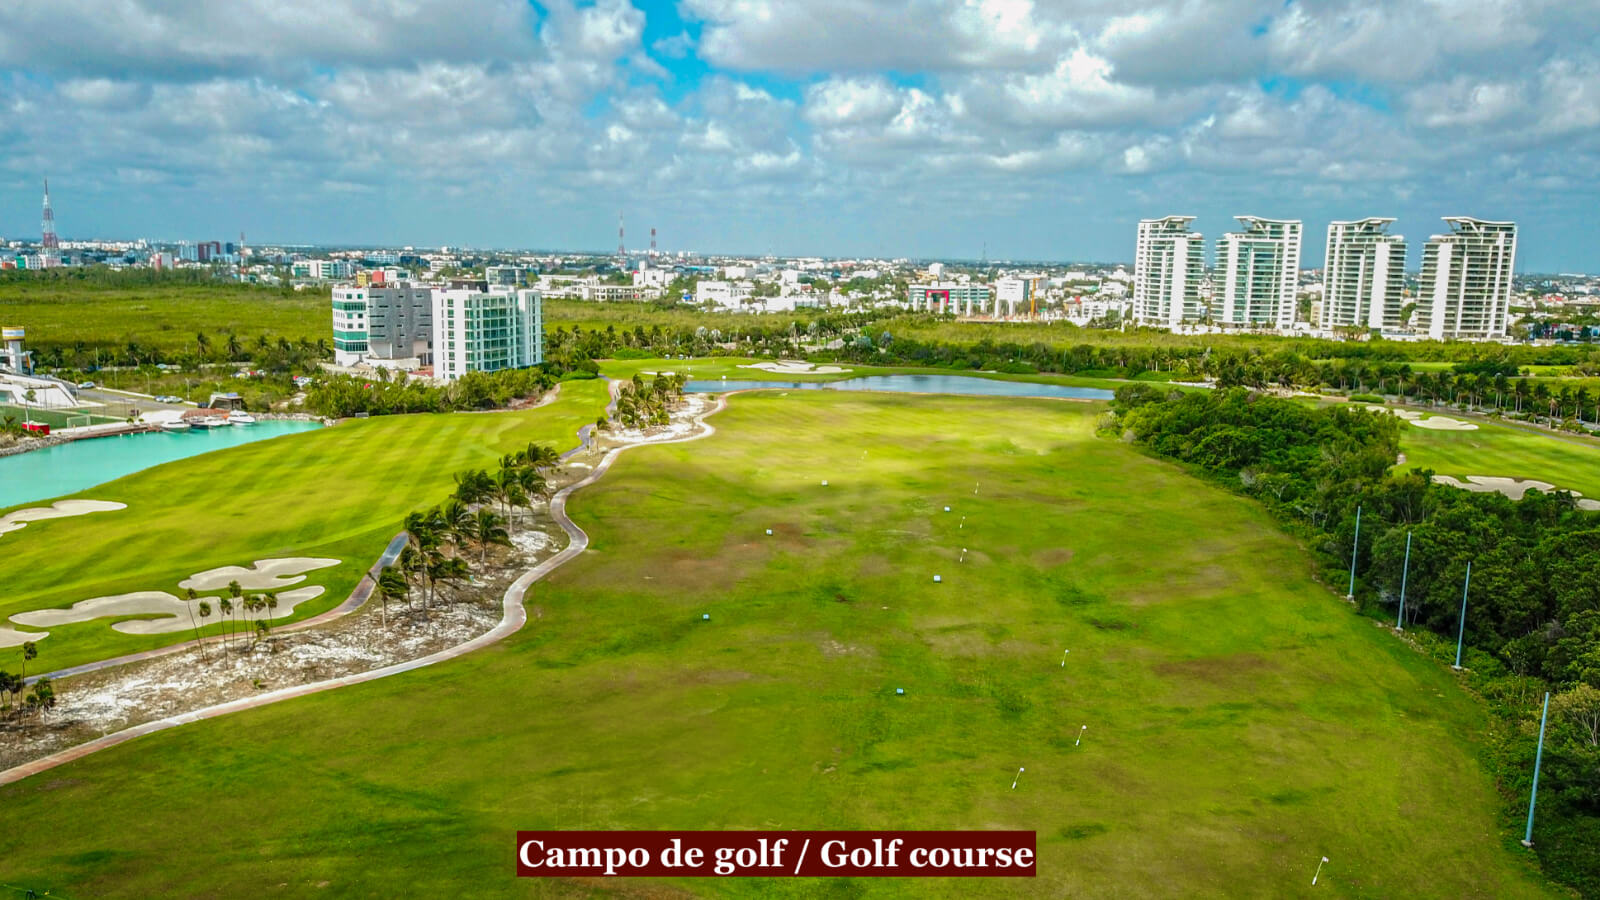 Condo with views of the sea in a sustainable building golf course in a nature reserve. Fully equipped and with amenities, semi-Olympic pool